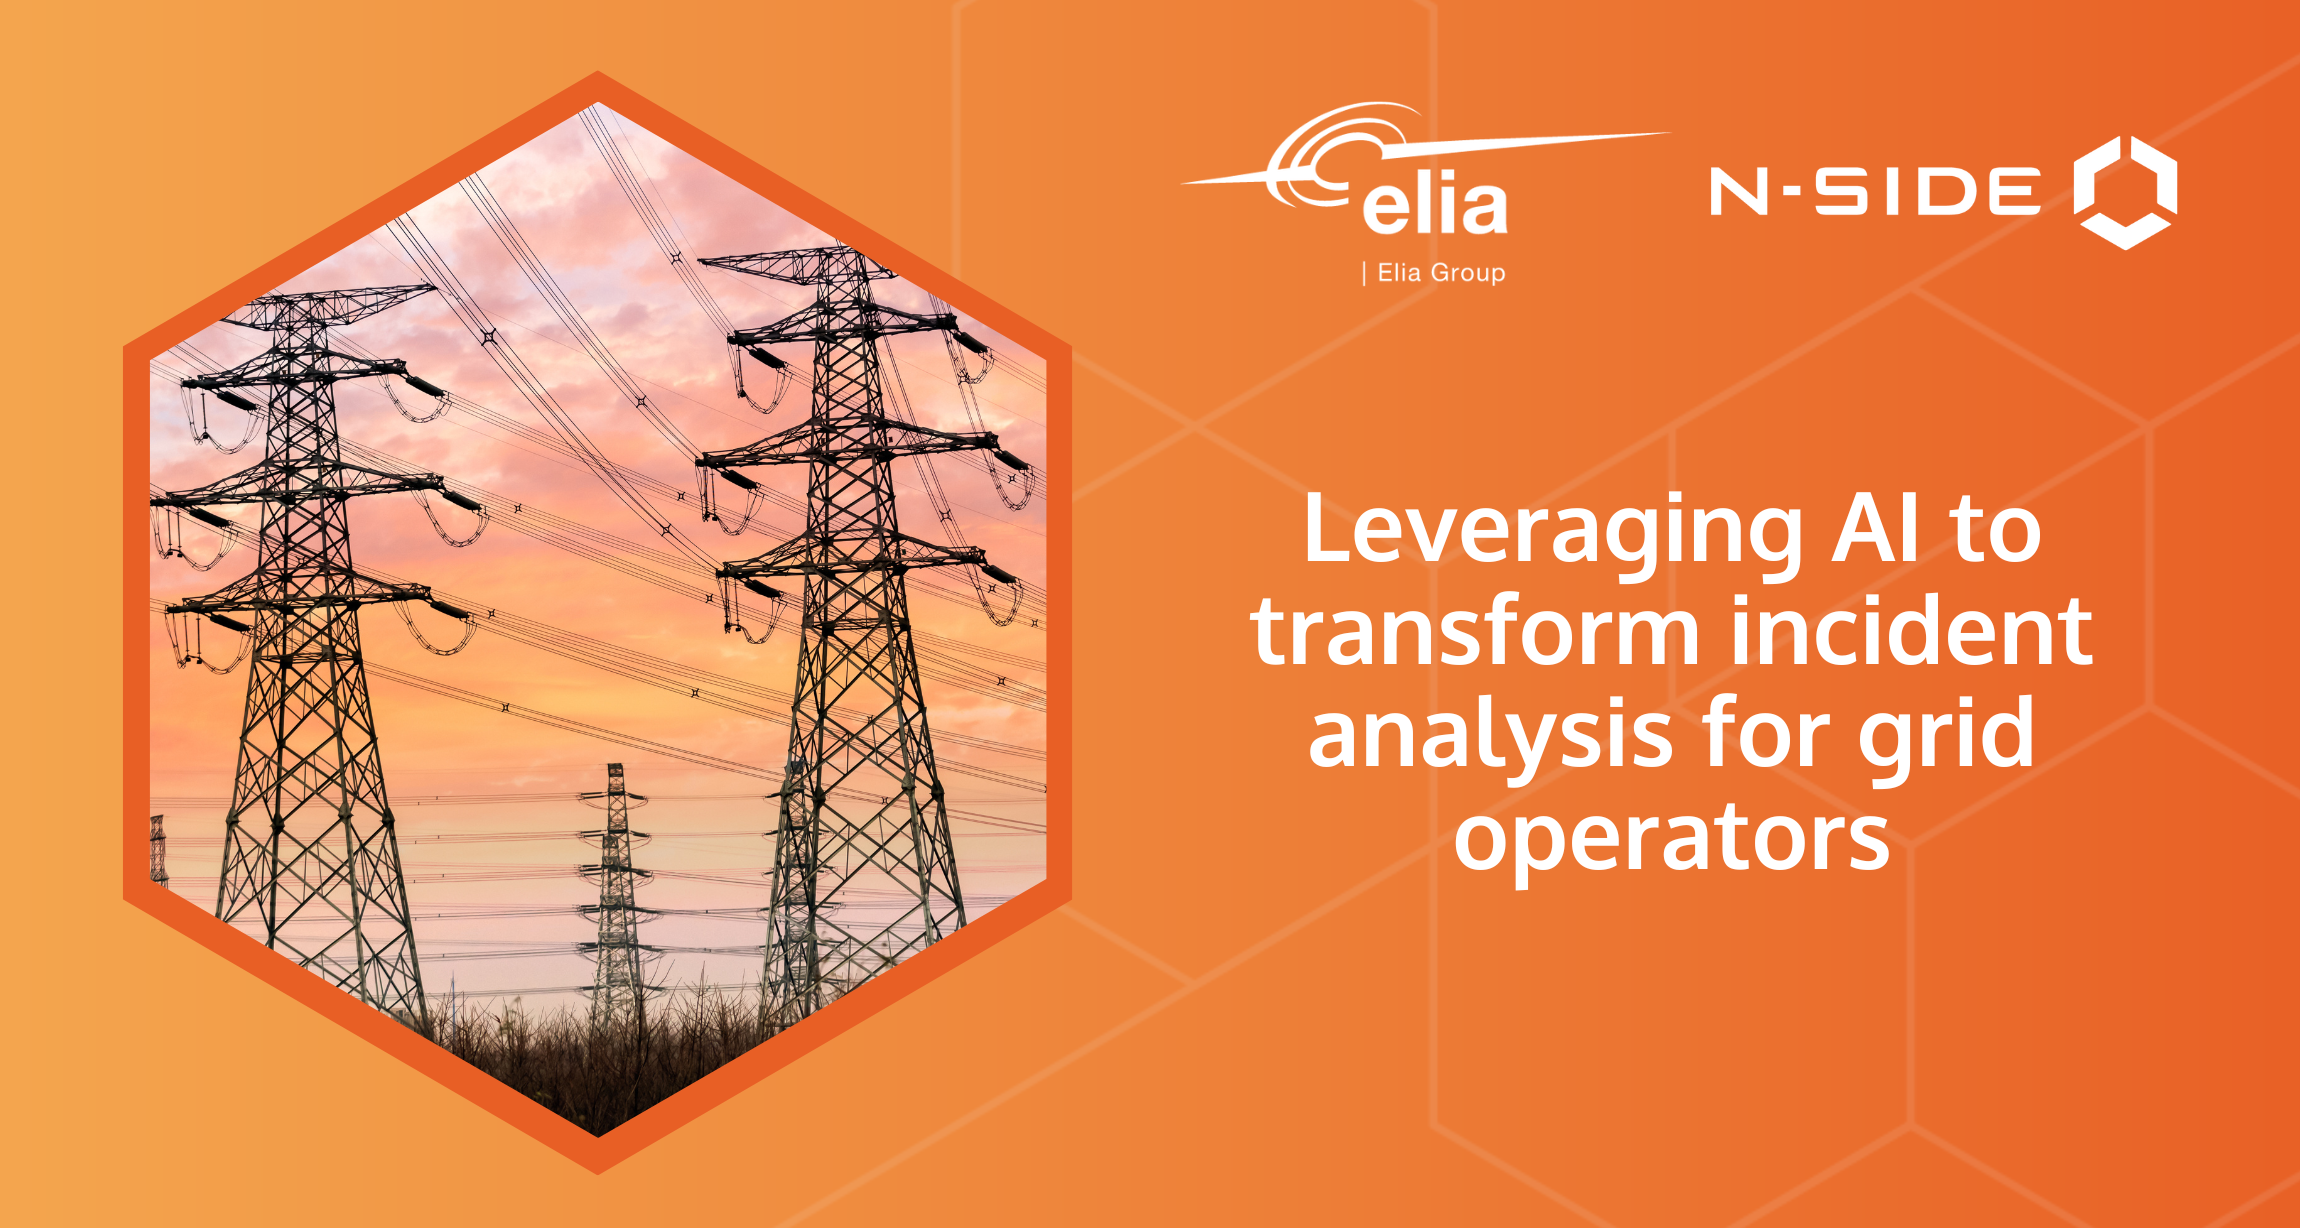 Leveraging AI to transform incident analysis for grid operators